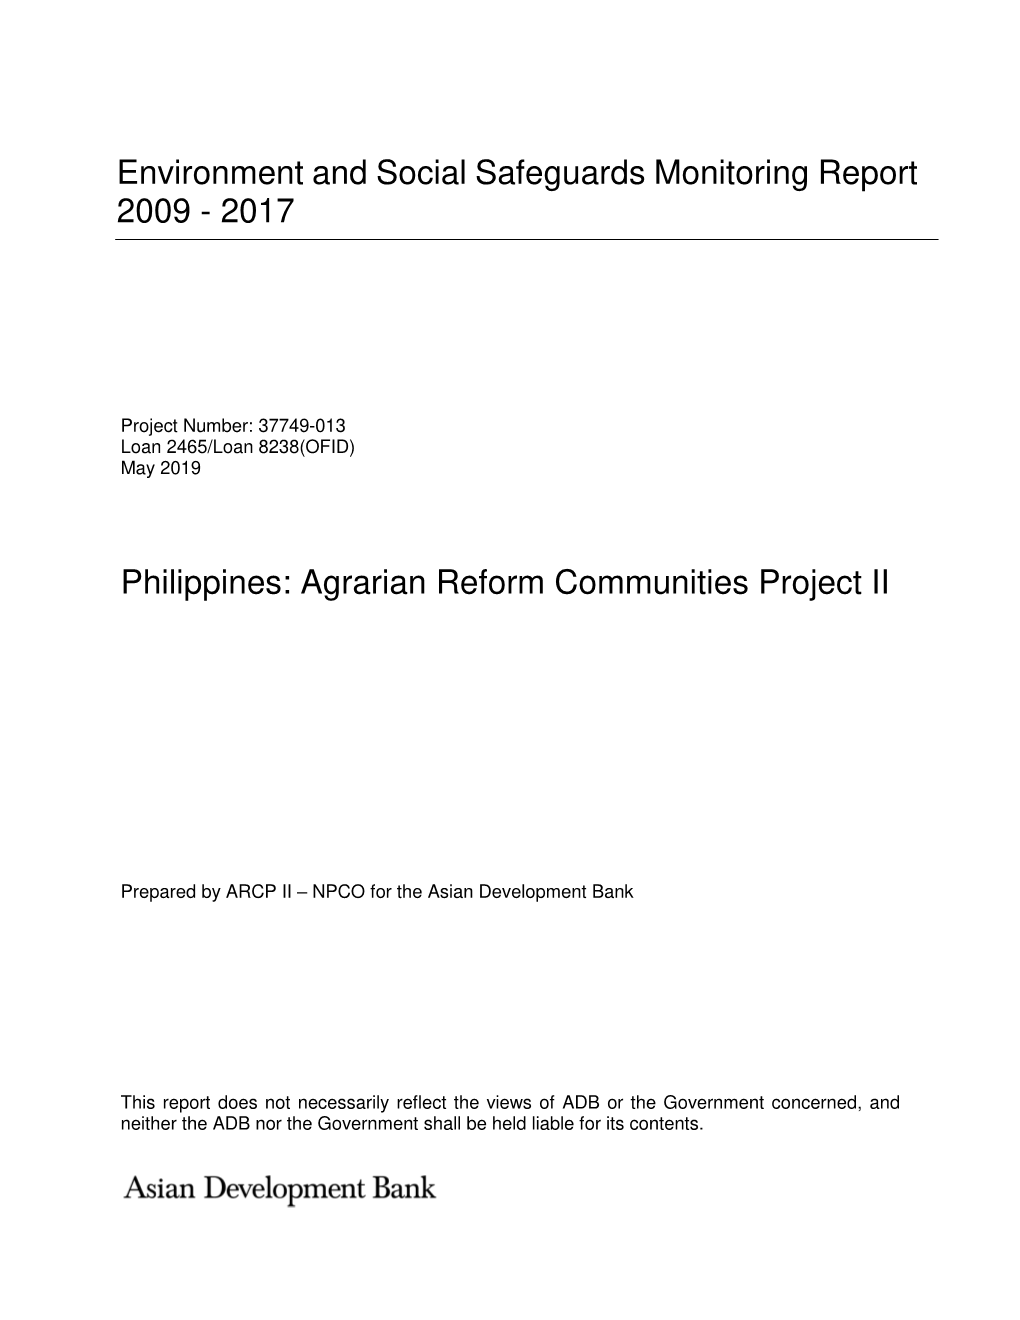 Agrarian Reform Communities Project II